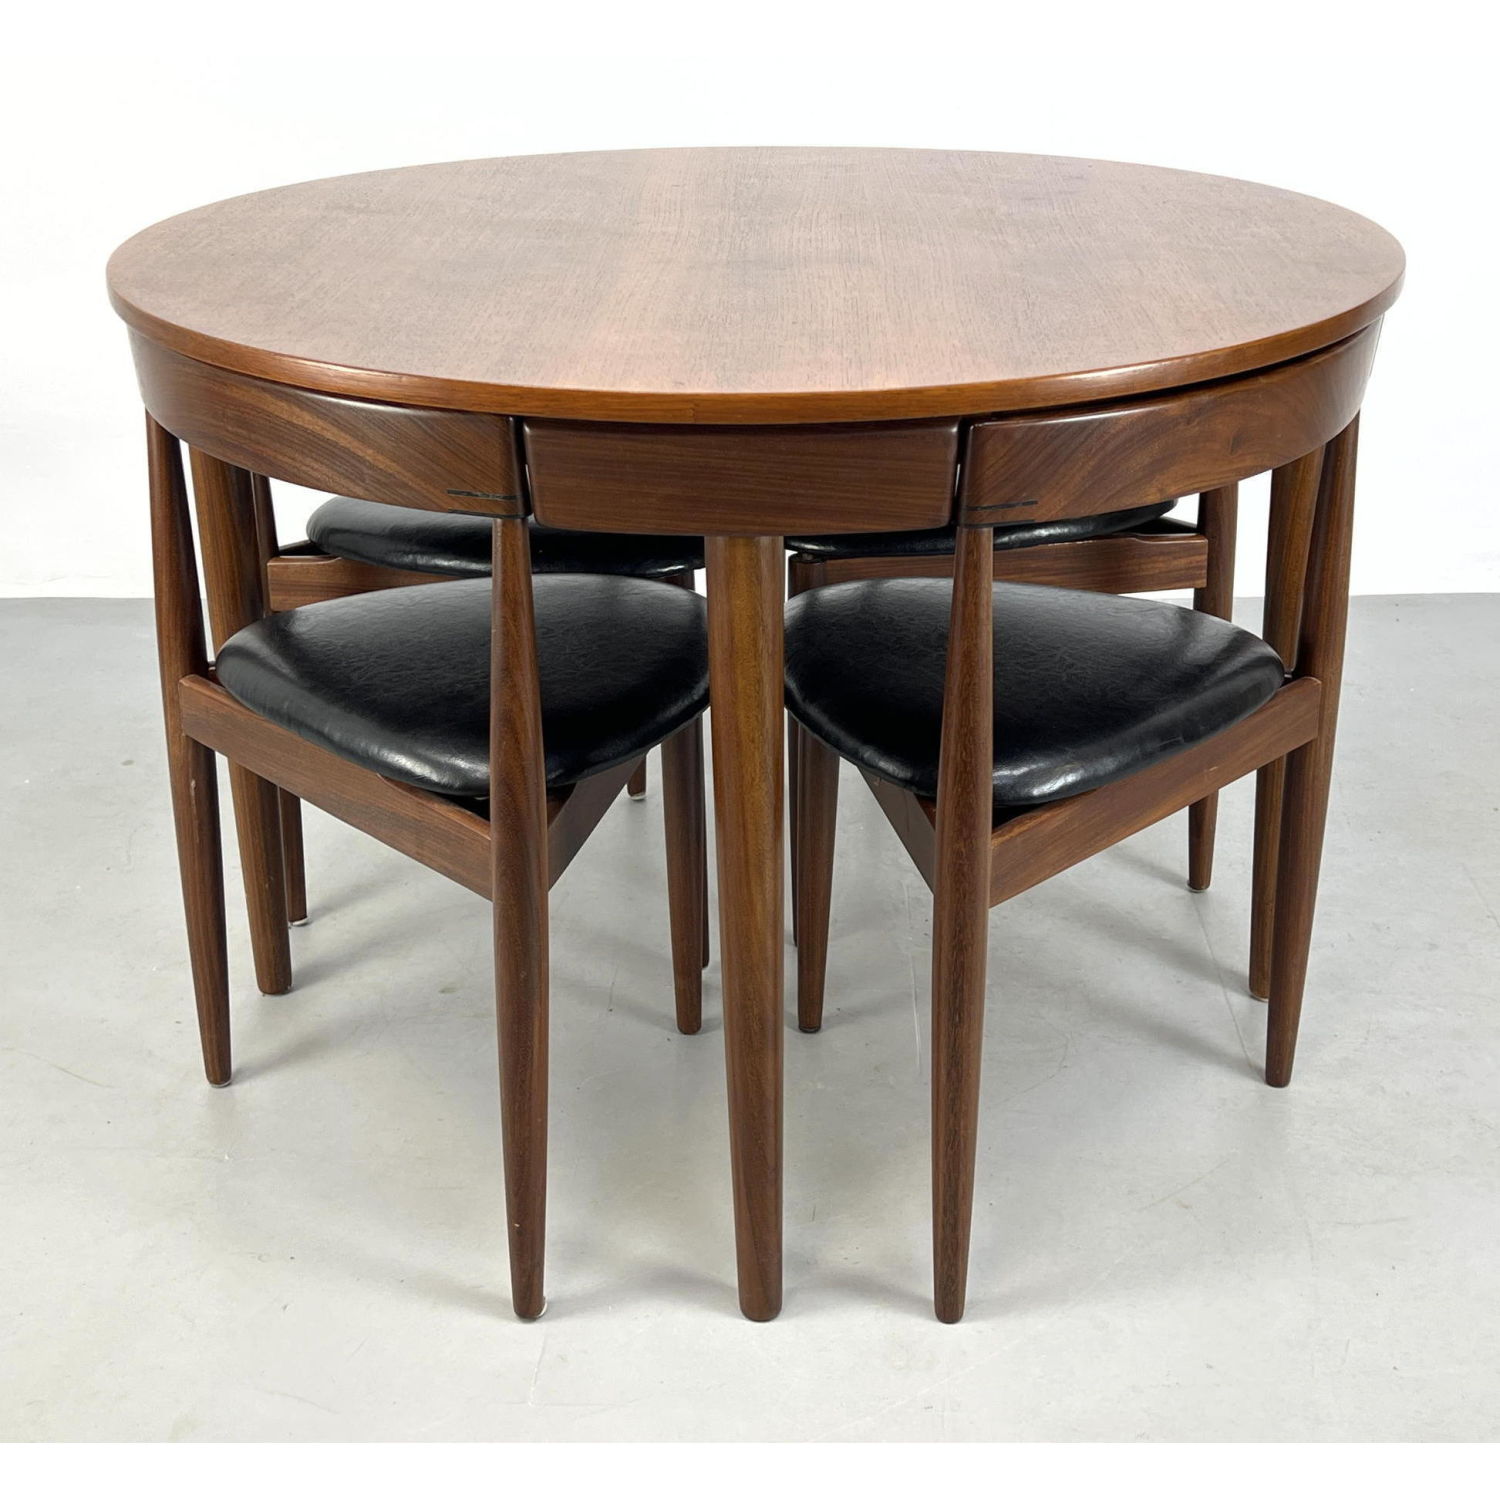 HANS OLSEN Dining Table and 4 Chairs.